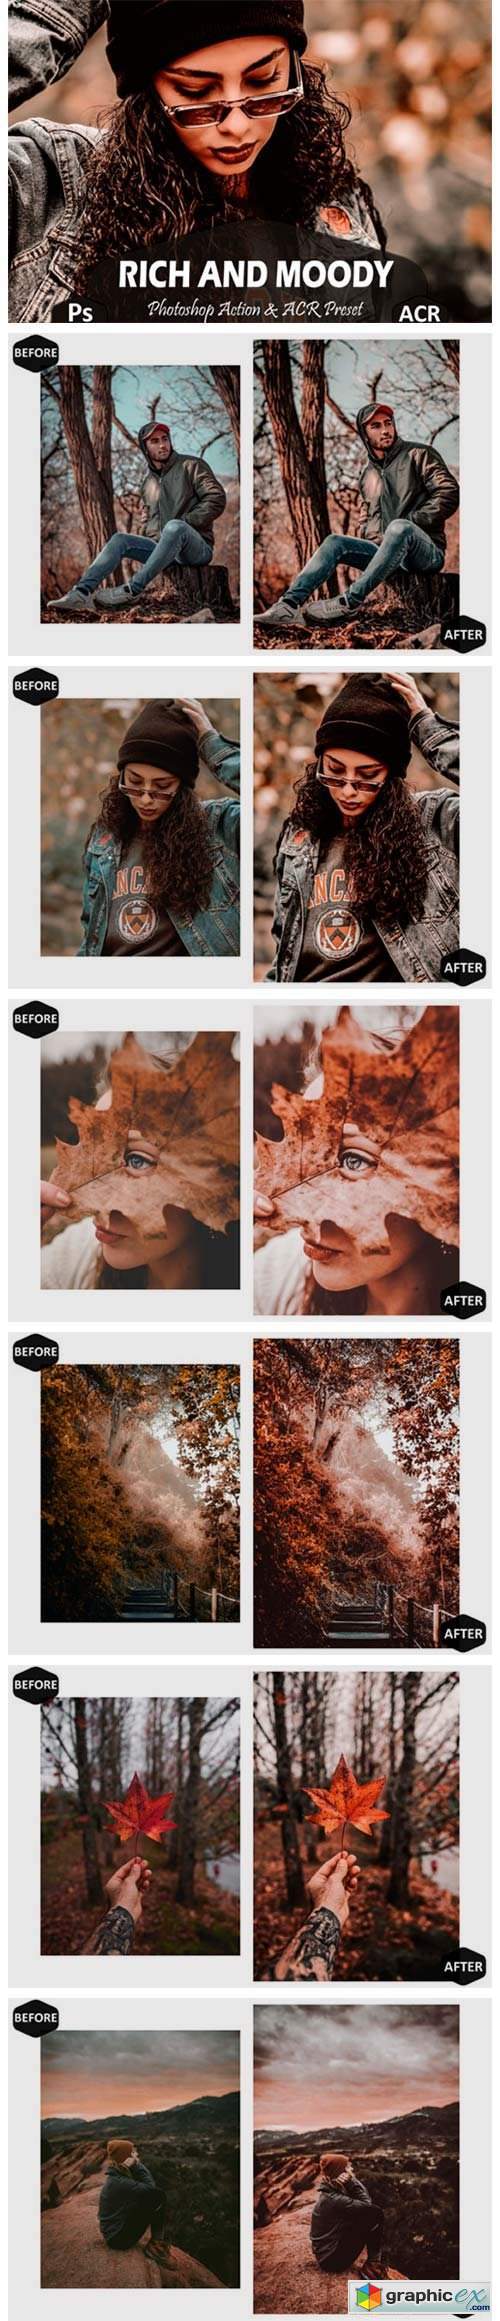 10 Rich and Moody Photoshop Actions